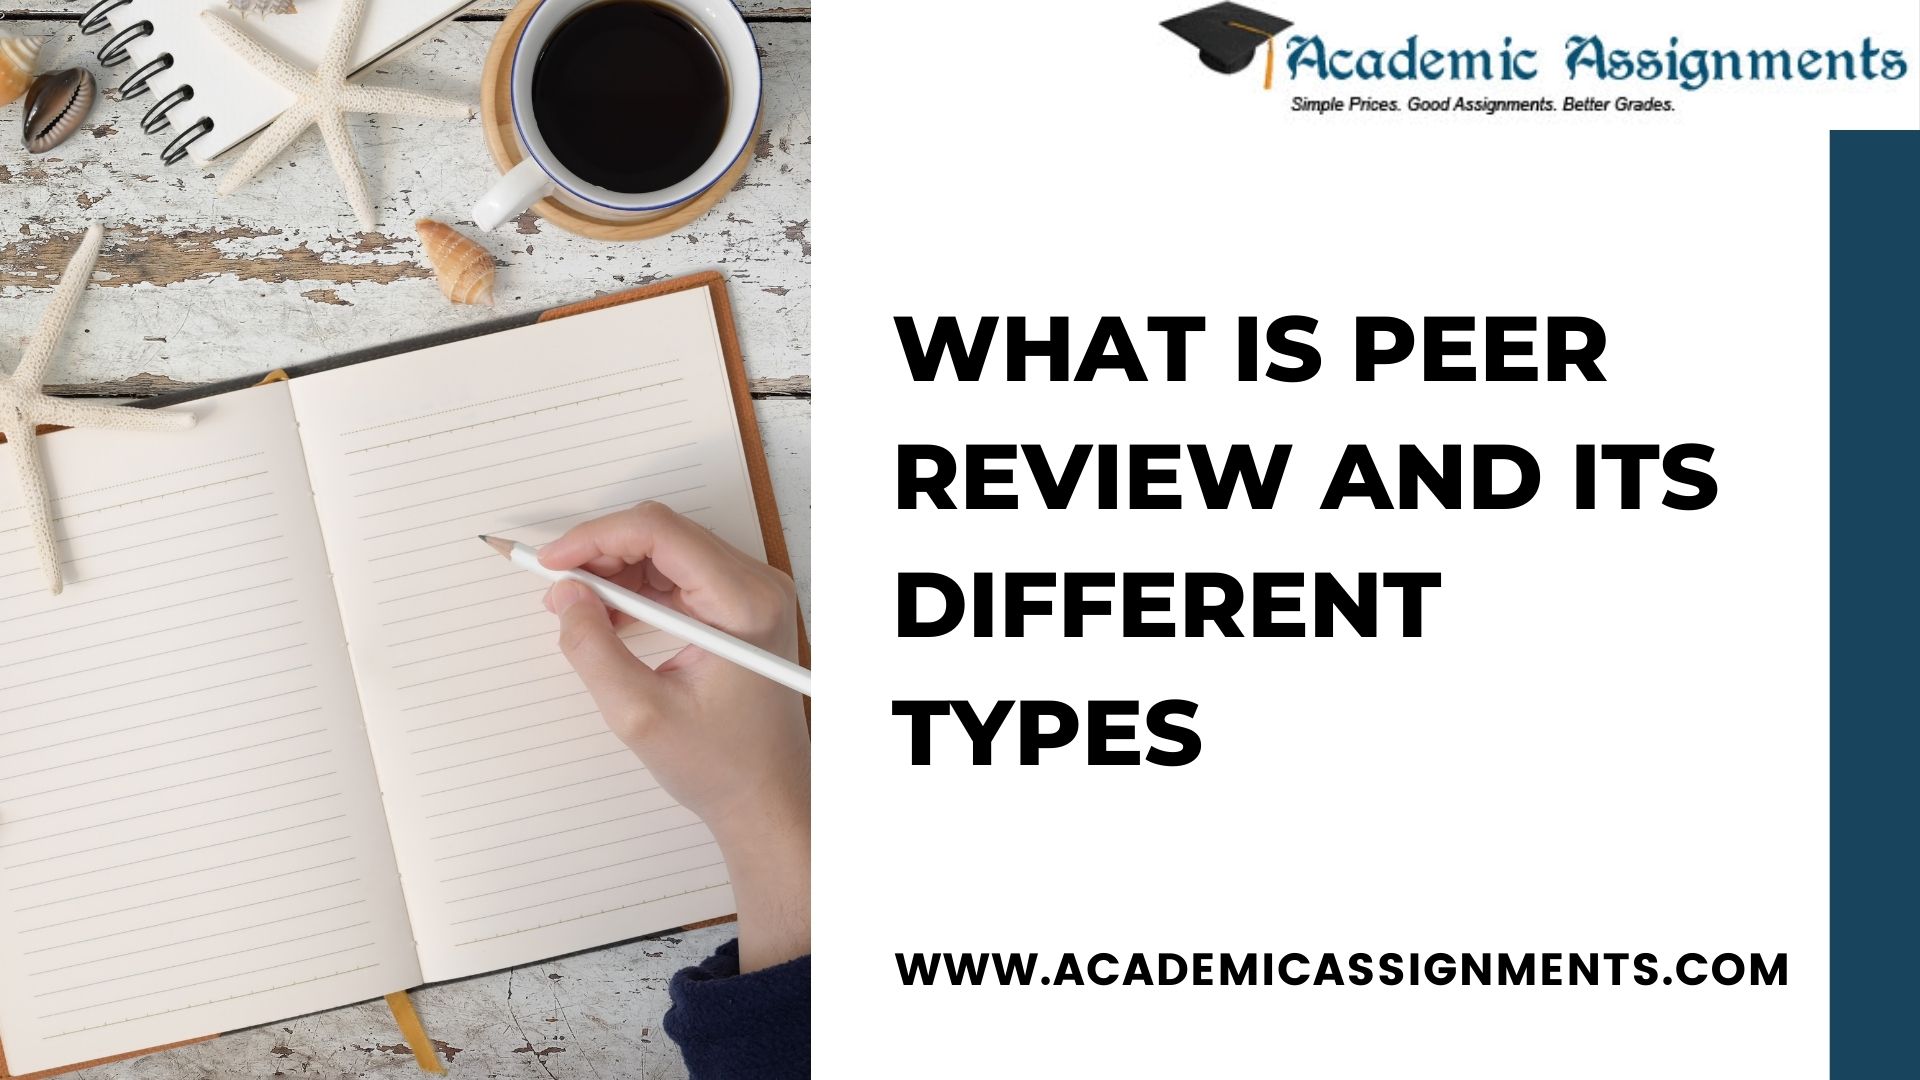 What is Peer Review and its Different Types